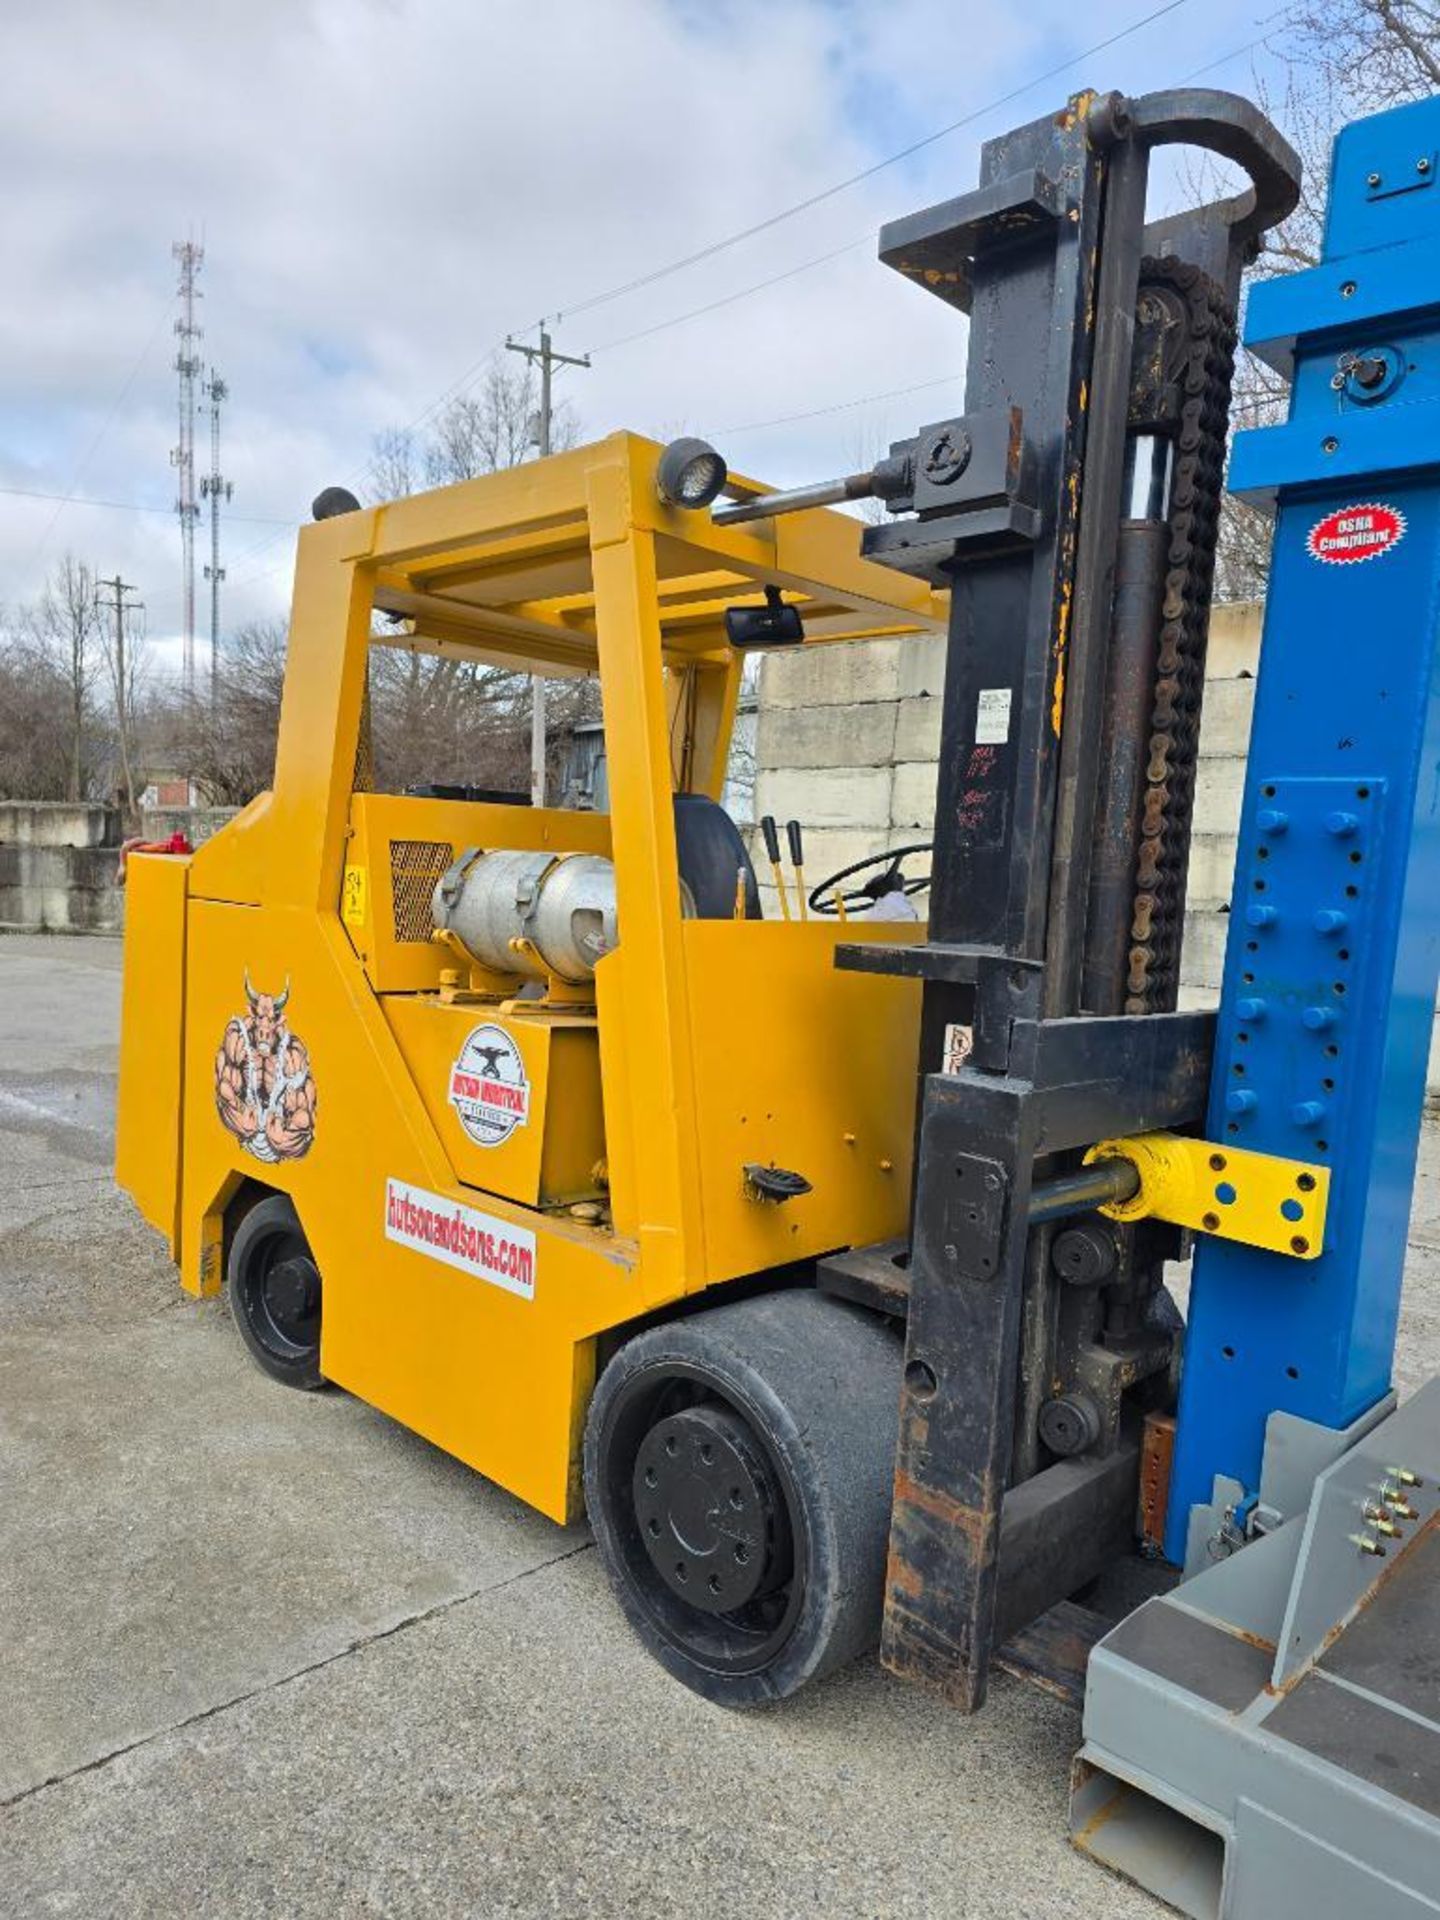 Caterpillar 30,000 LB. Forklift, Model E300, S/N 6990, 116" 2-Stage Mast, 15" W Solid Cushion Tires, - Image 2 of 9